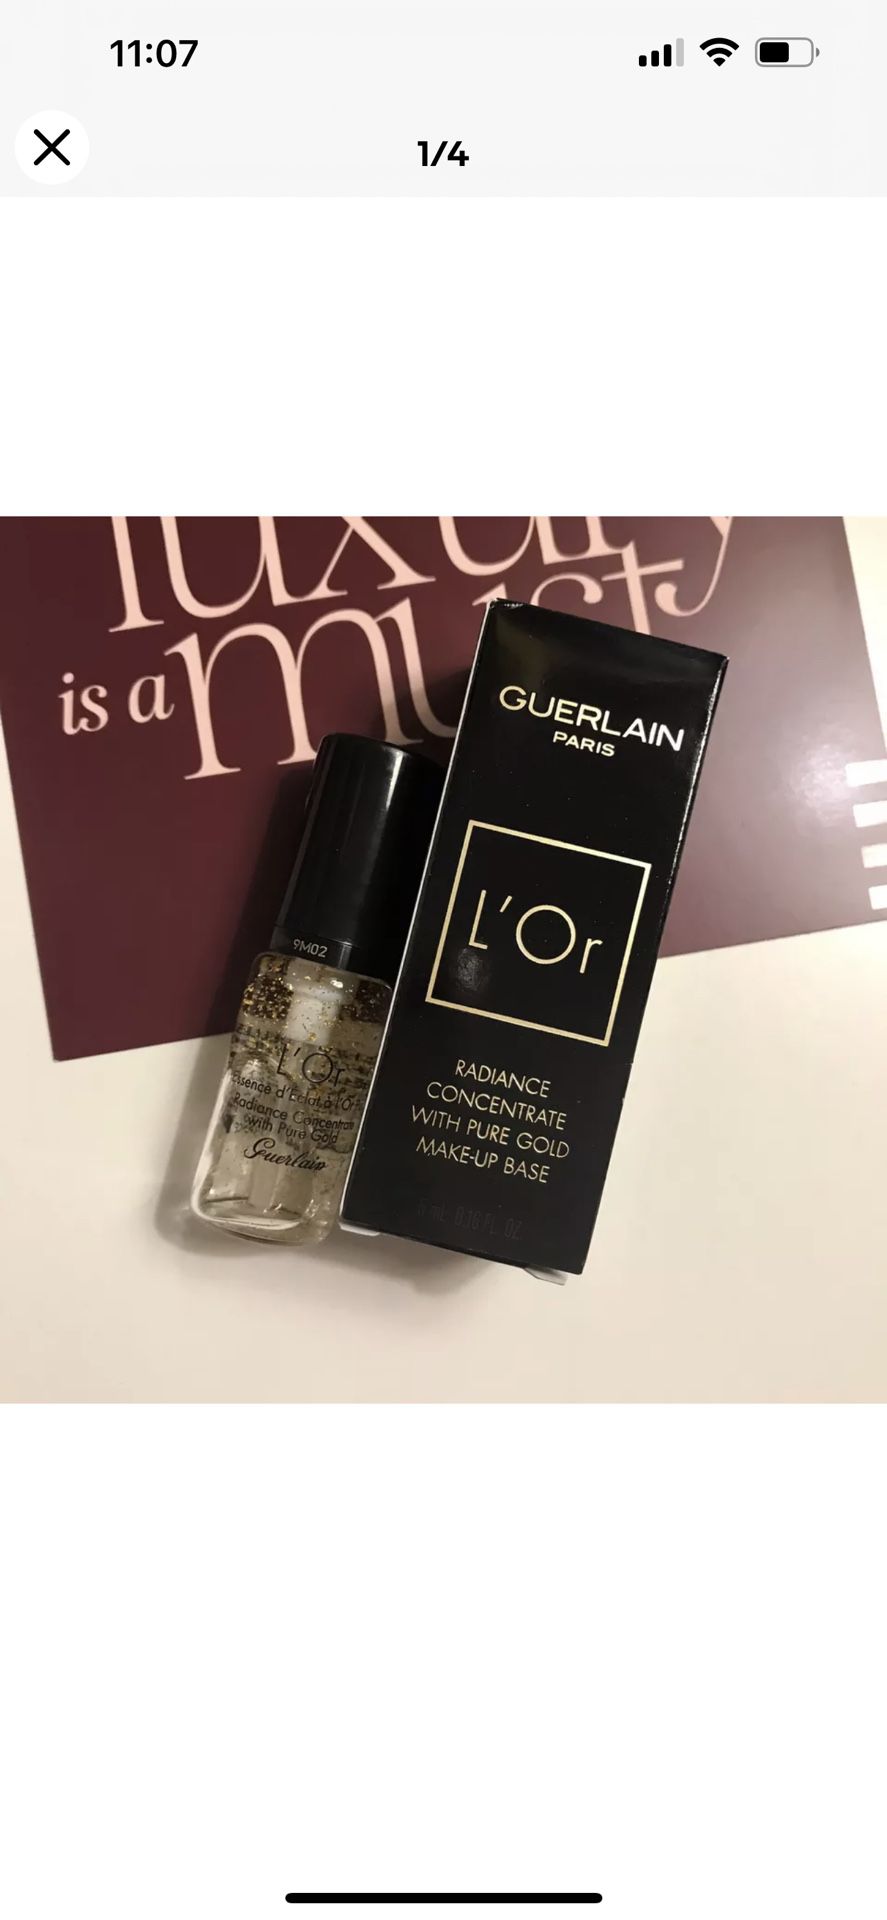 GUERLAIN L'Or Radiance Primer with Pure Gold .16oz Dlx Travel Size - NEW in Box!